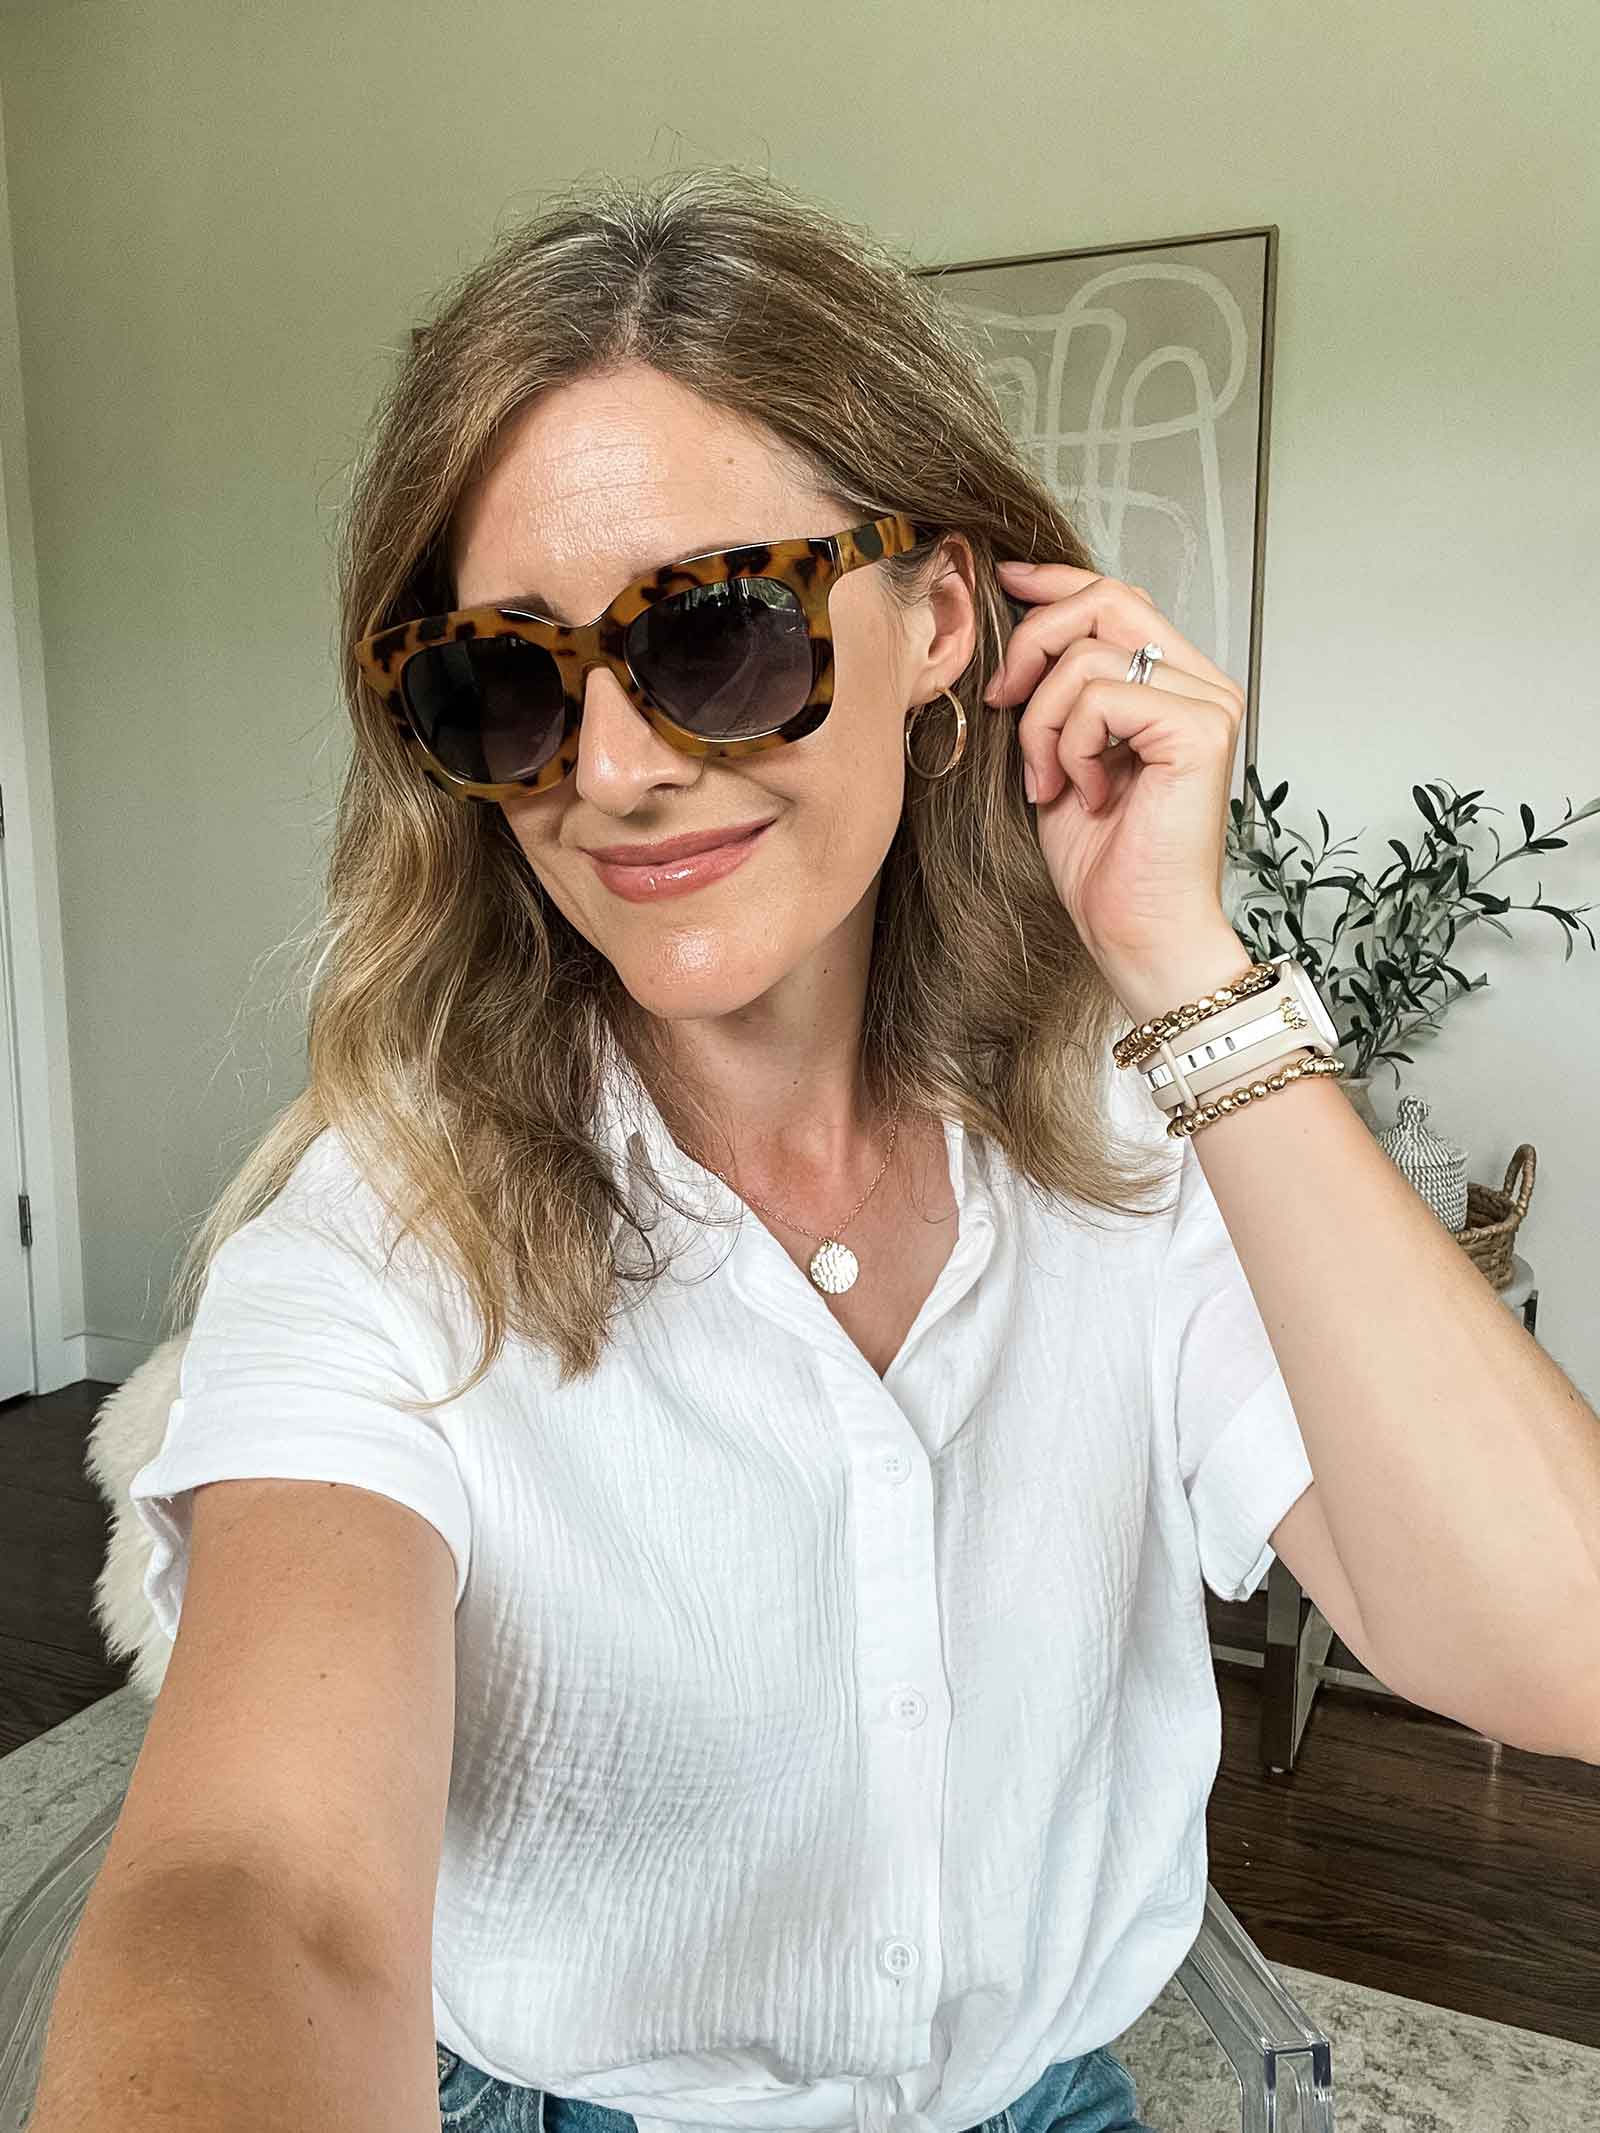 Budget Babe reviews four new polarized sunglass styles under $29 from Peepers